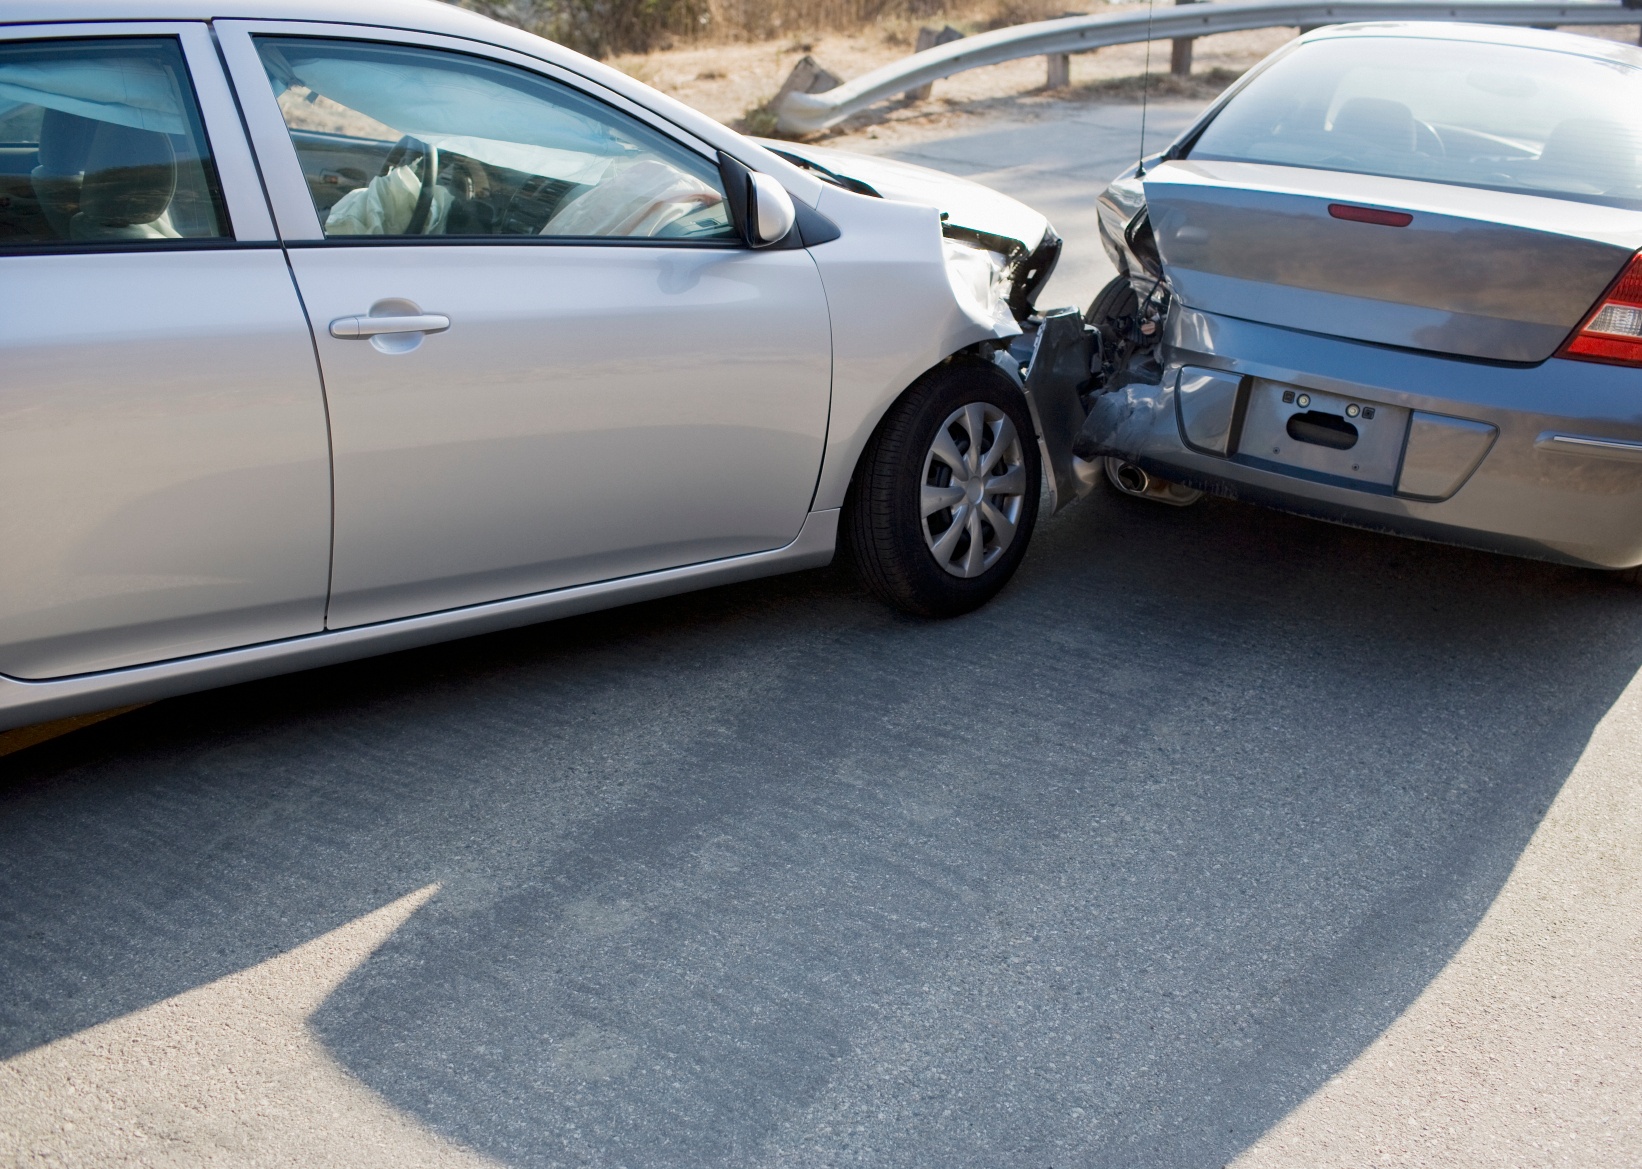 Two-cars-in-collision-on-roadway-000024405597_Medium-1